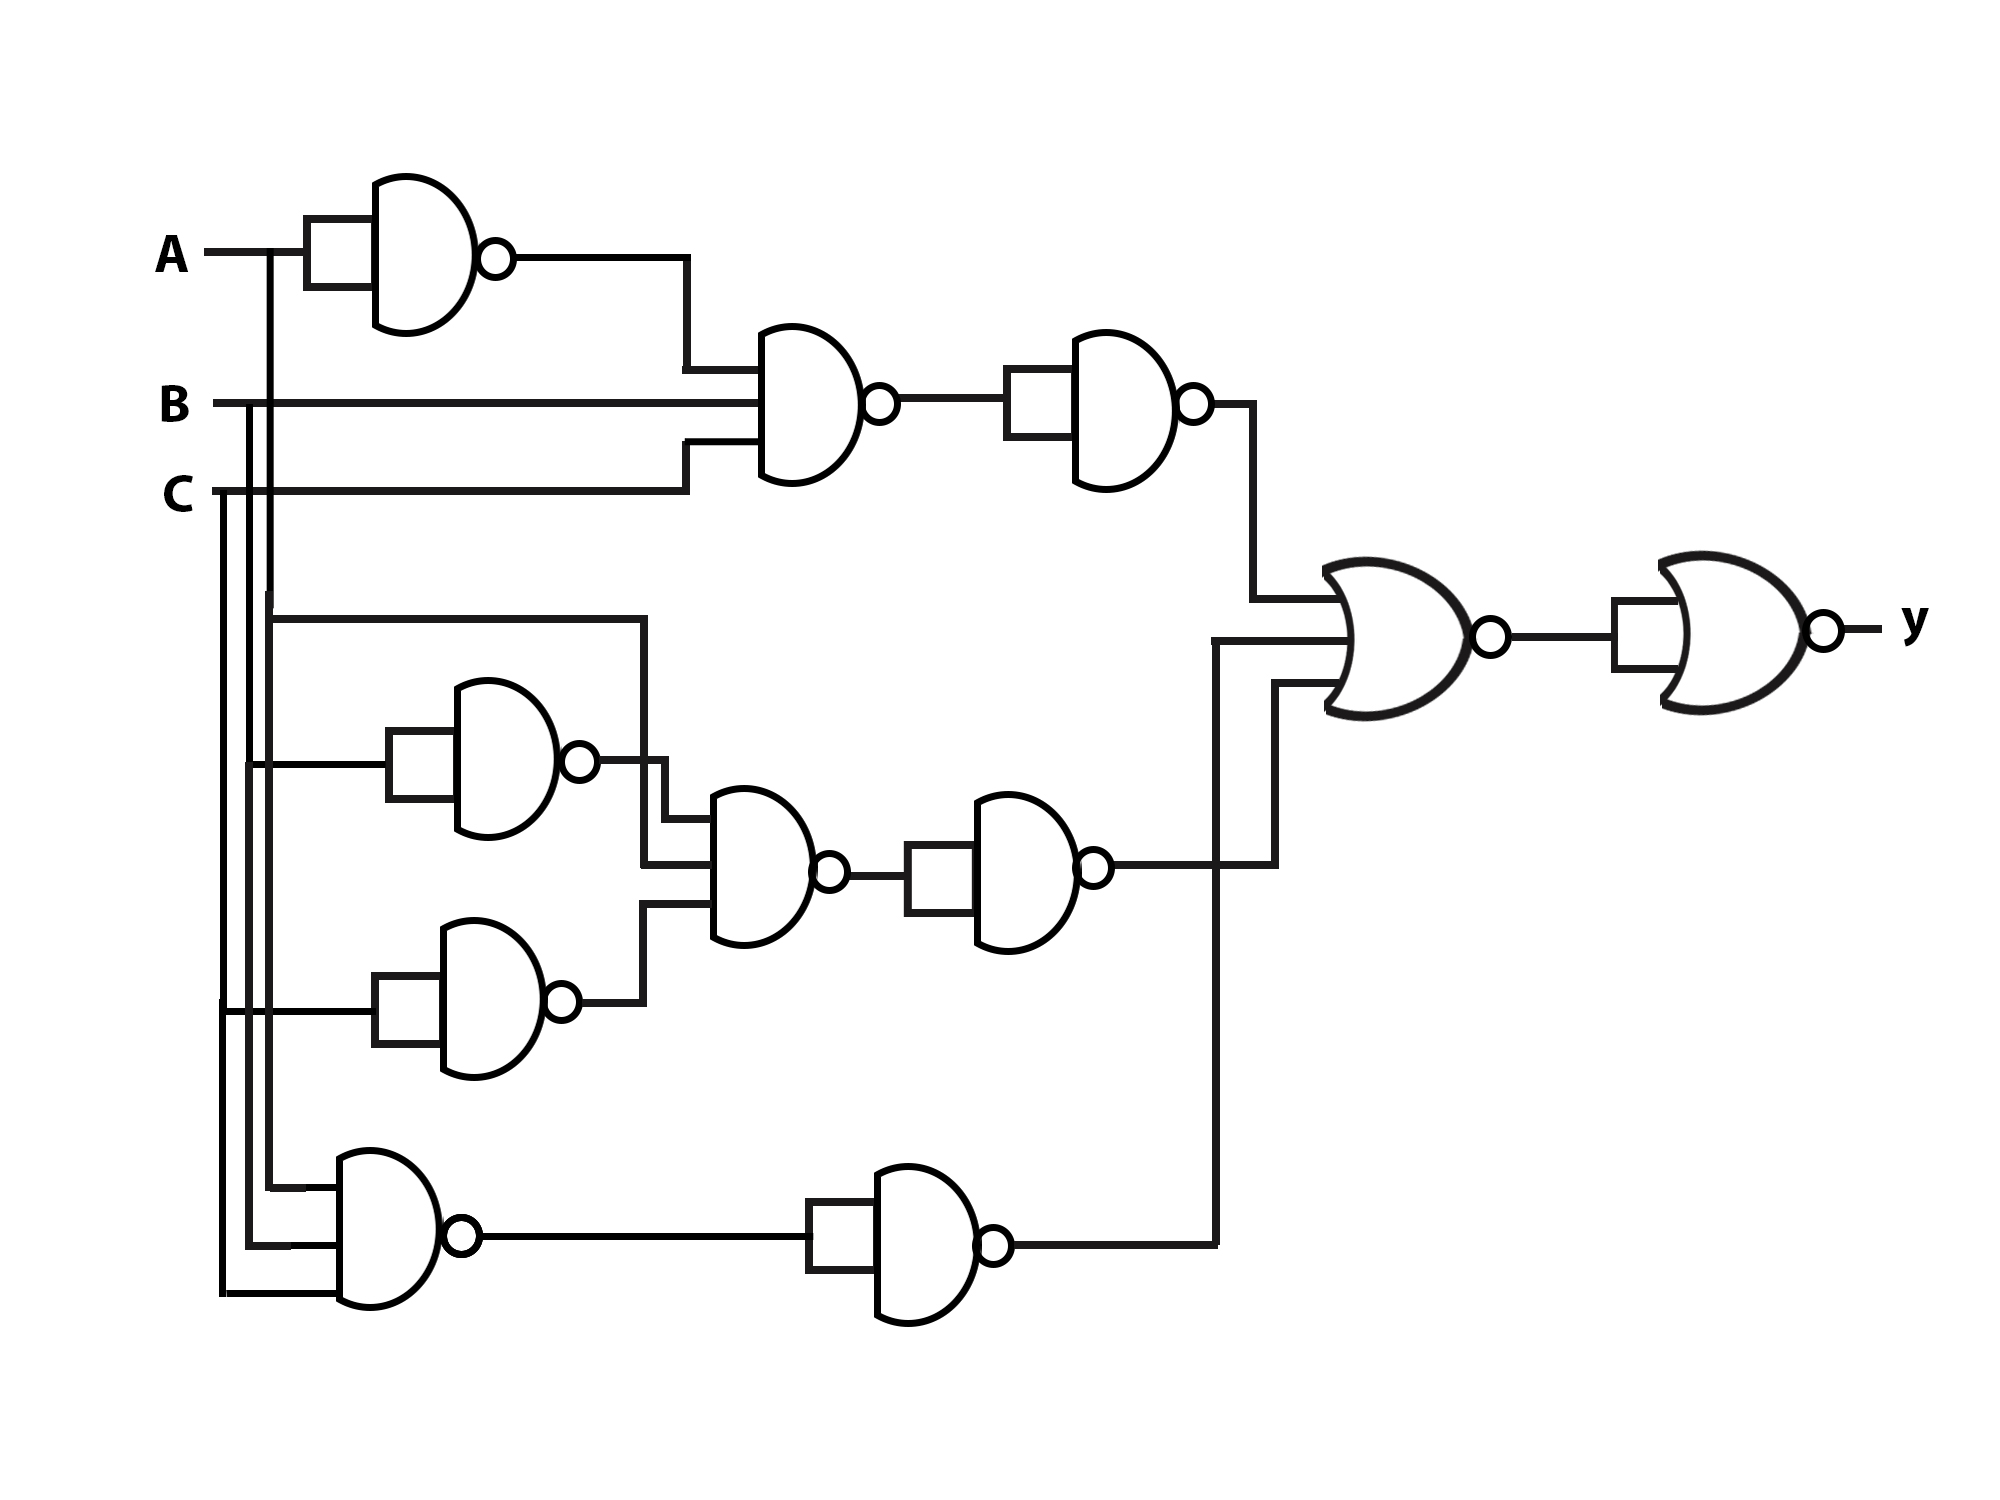 NAND and NOR gate implementation